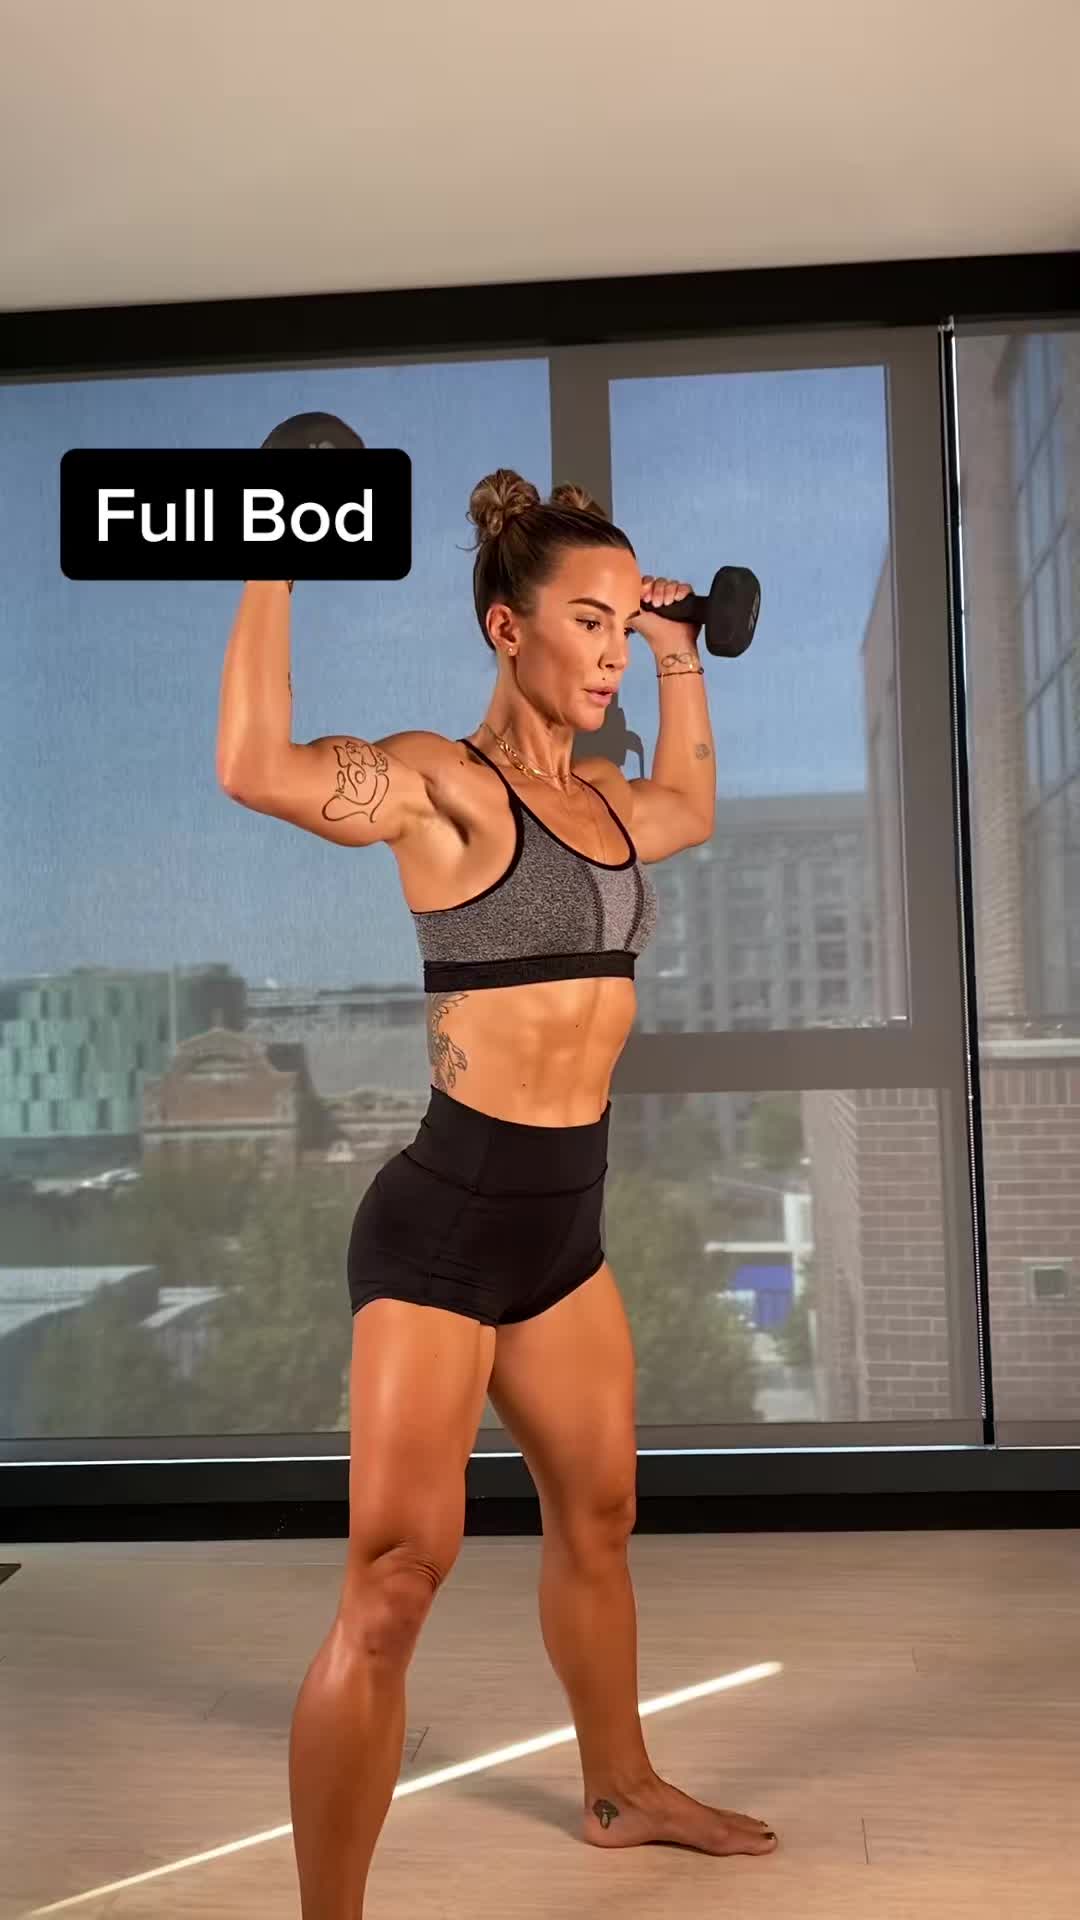 This may contain: a woman is doing exercises with dumbbells in front of a window and the words full bad above her head